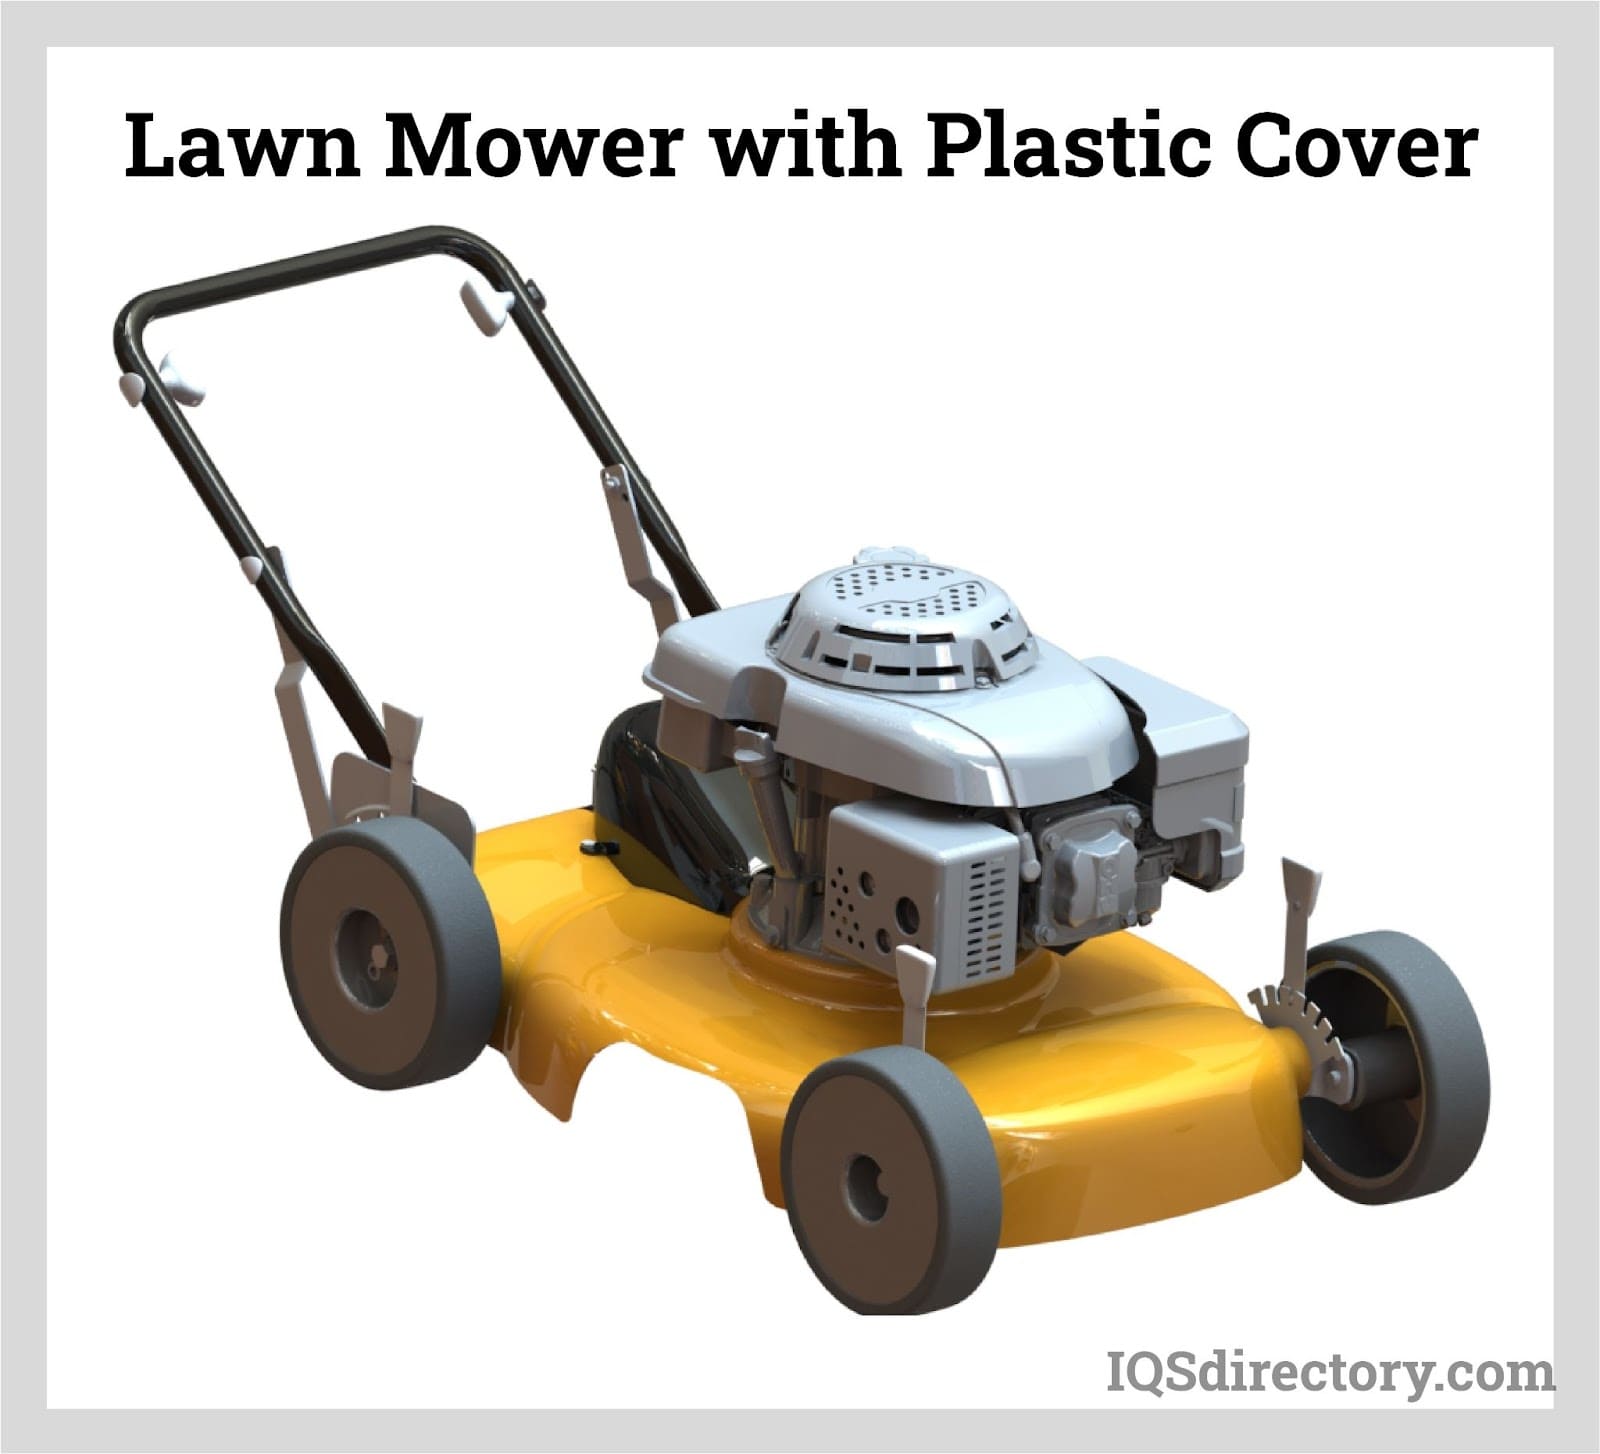 Lawn Mower with Plastic Cover